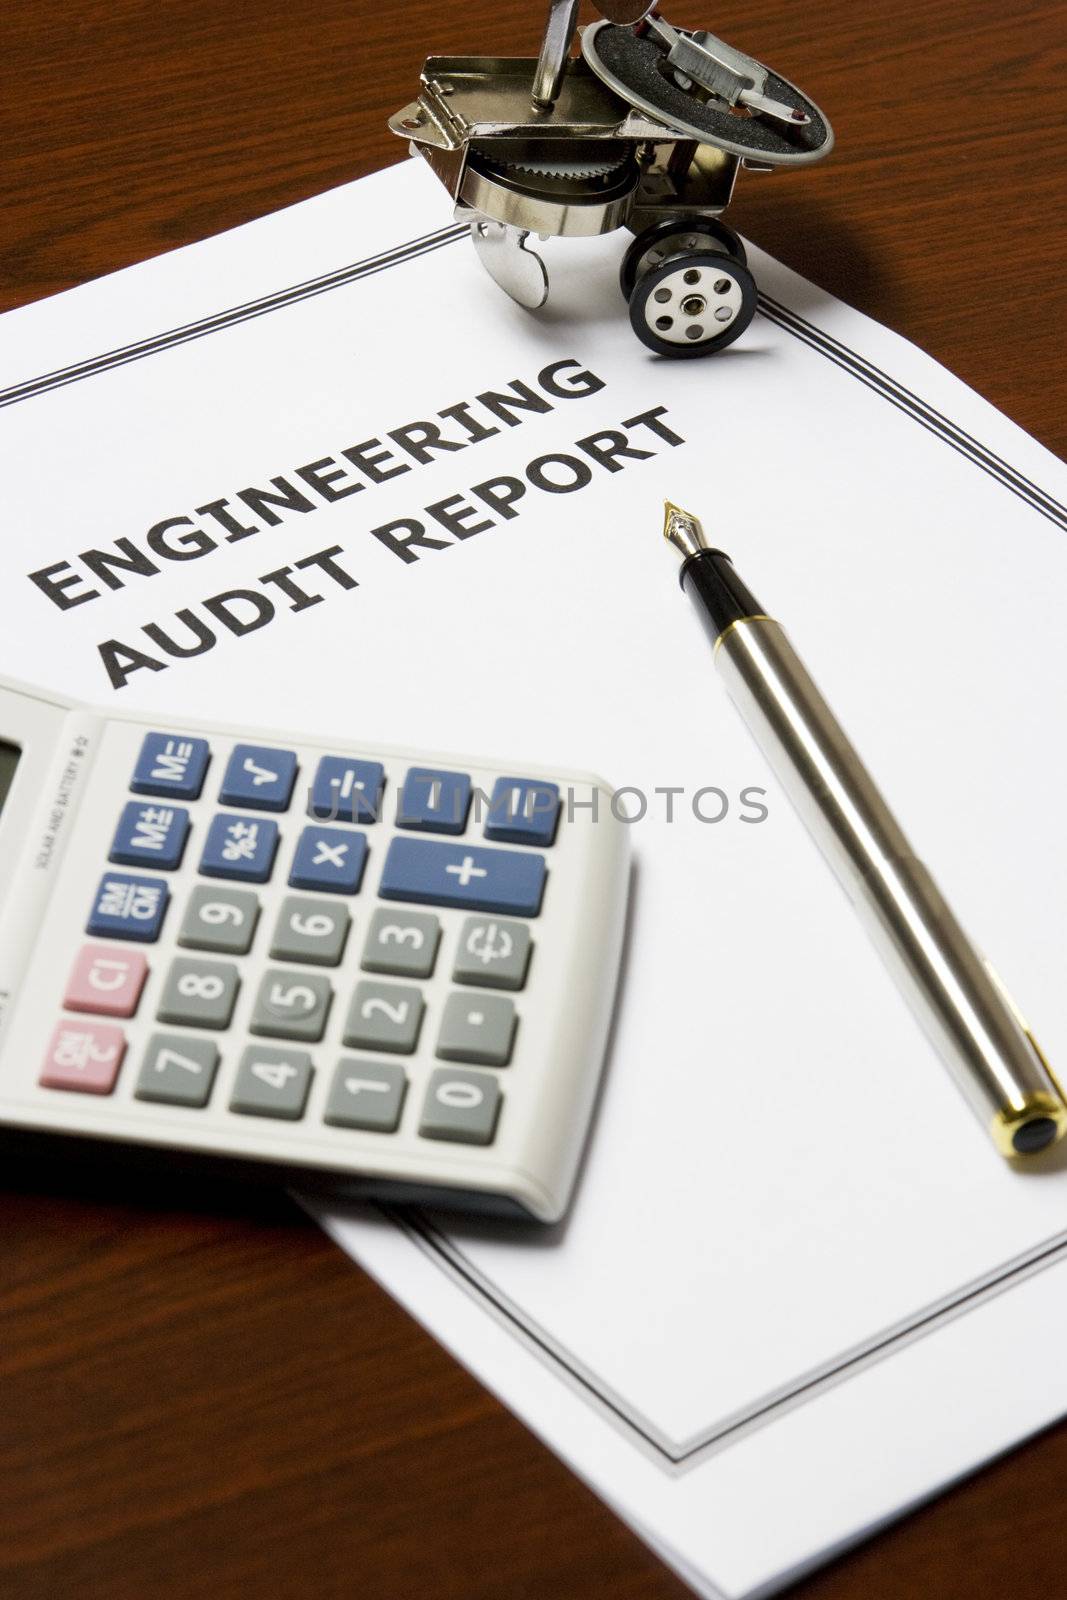 Engineering Audit Report by shariffc